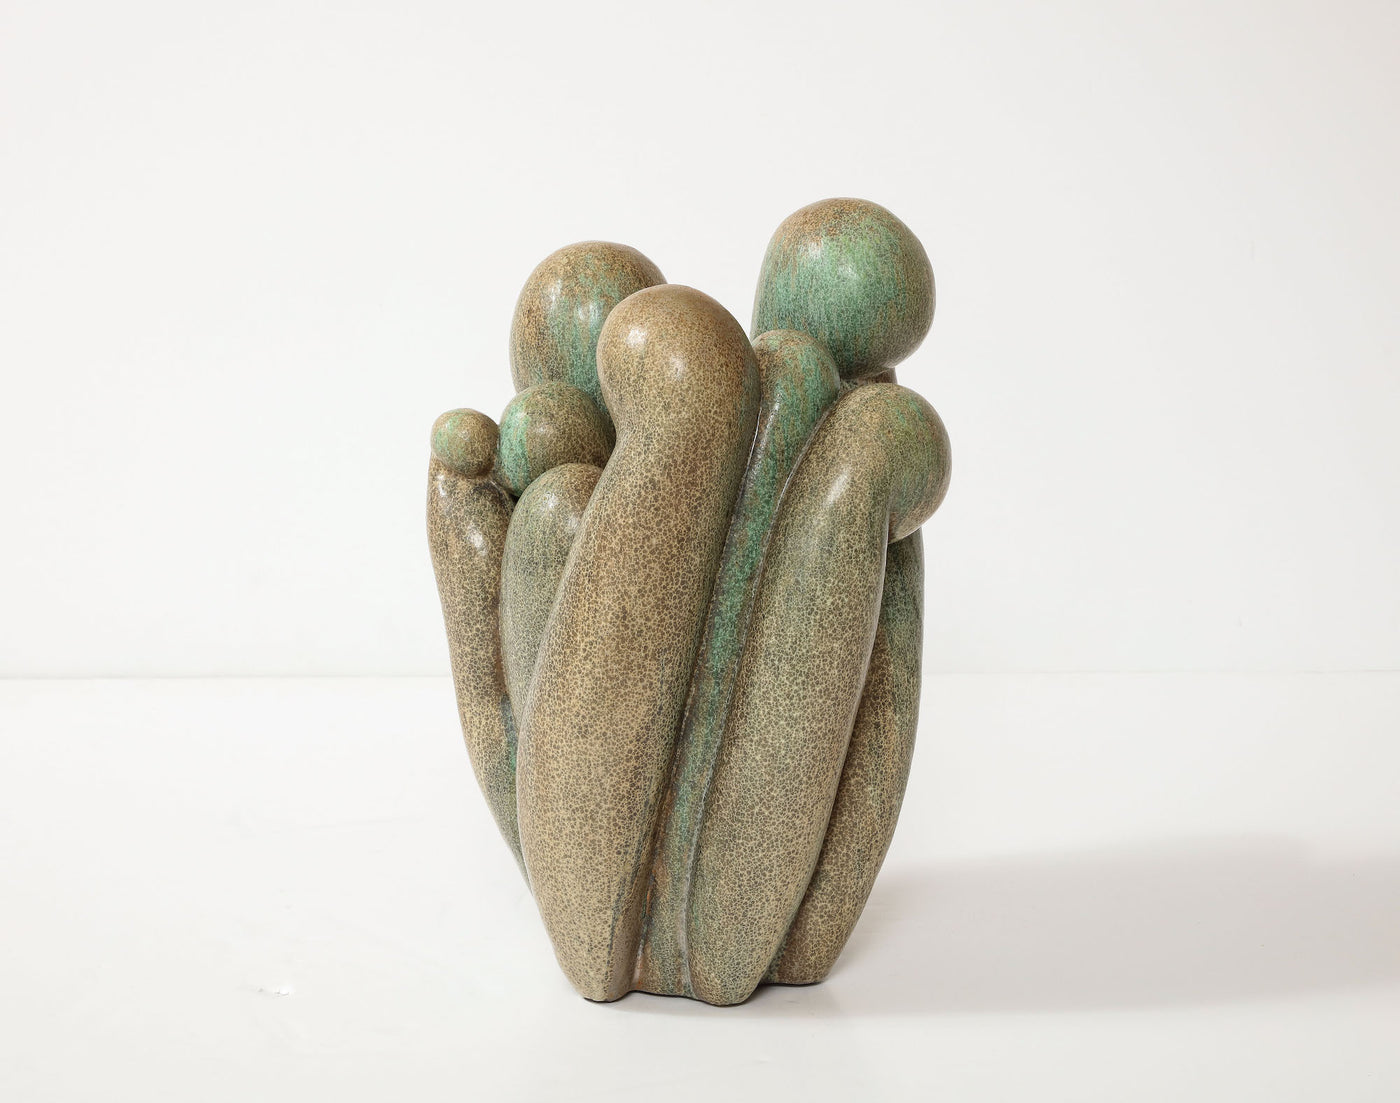 Untitled Sculpture #10 by Rosanne Sniderman